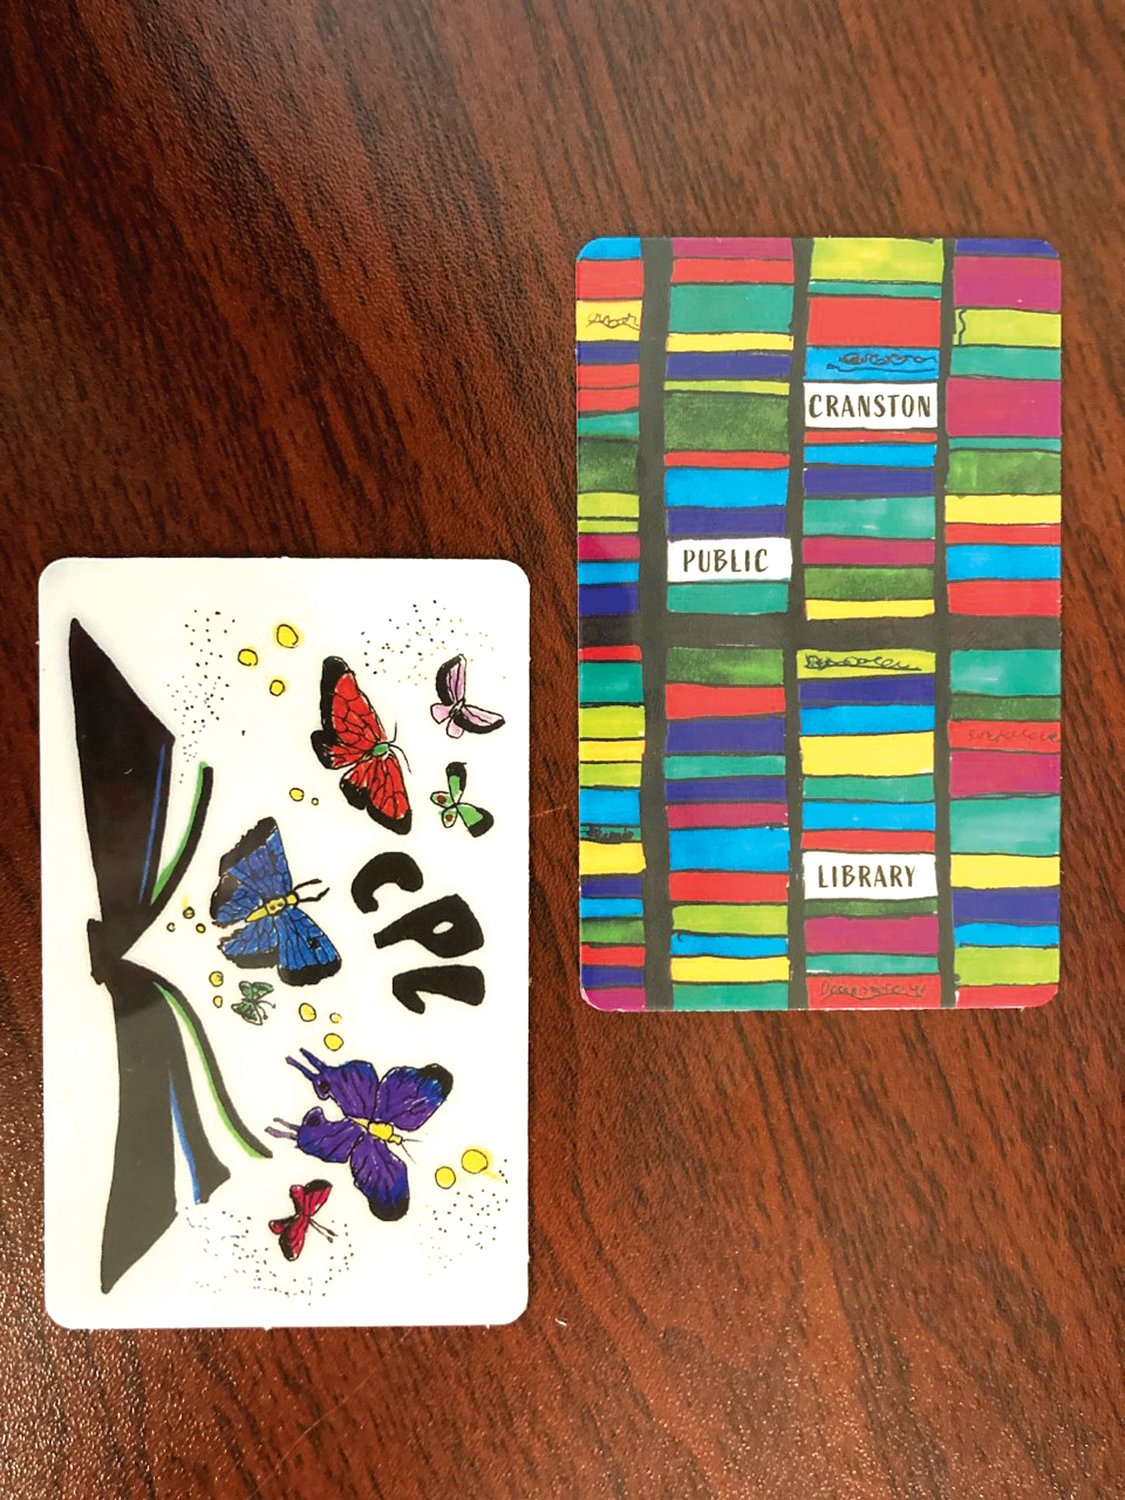 NEW DESIGNS: Library patrons now have the option of two new library cards, which were designed by Norah Kusz and Zachary Leone in CPL’s Library Card Design Contest that was hosted in September.